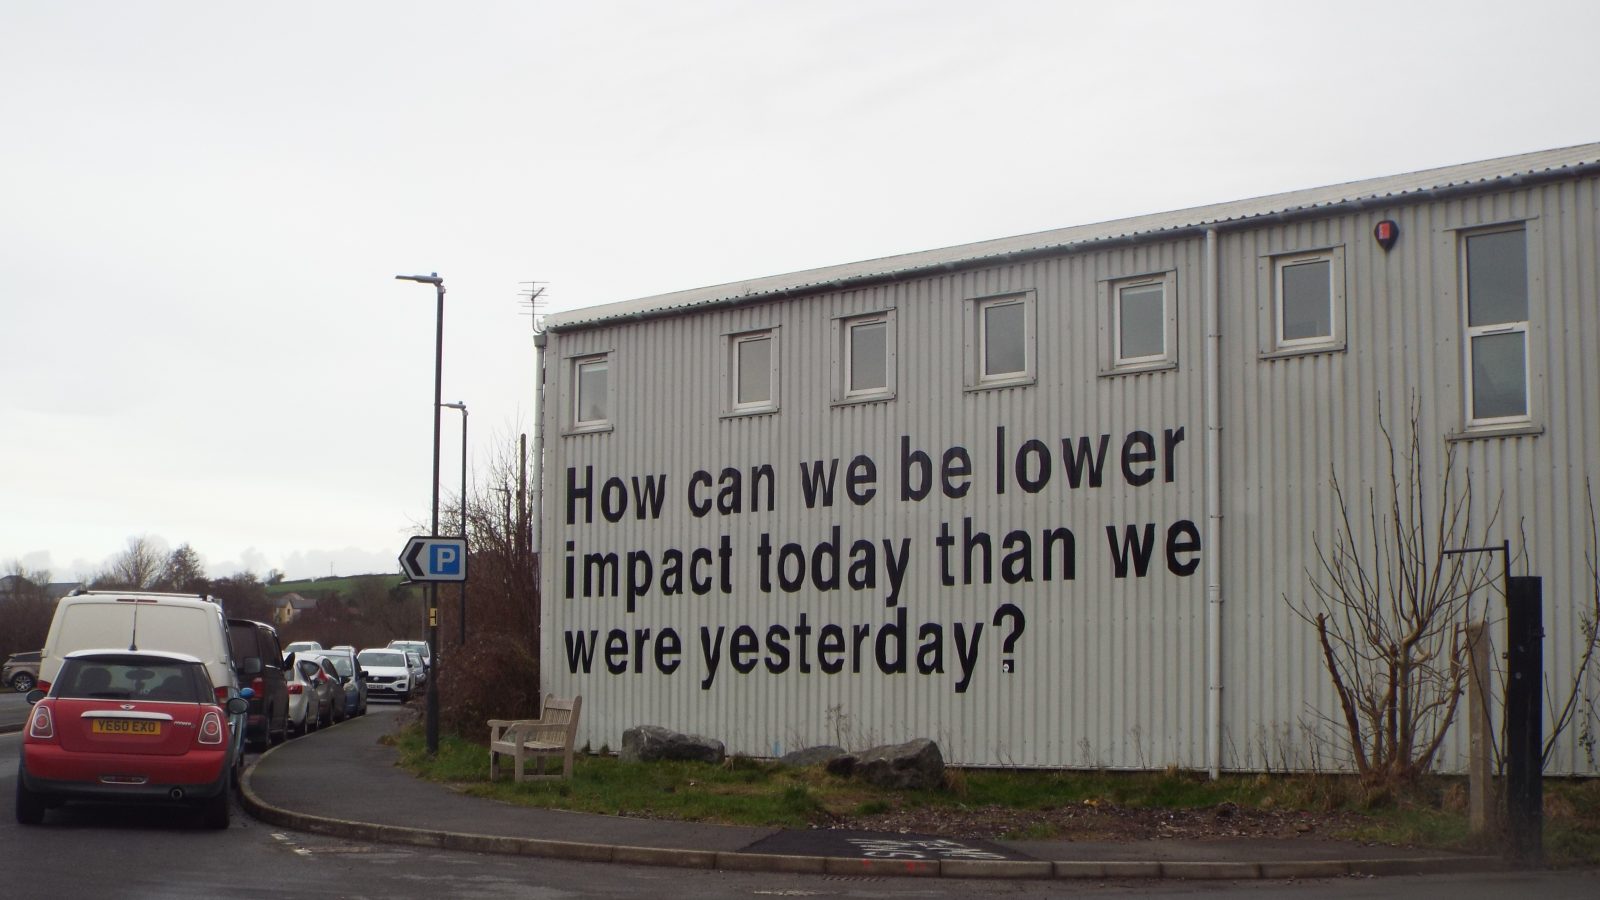 Building showing large graffitti "How can we be lower impact today than we were yesterday?"